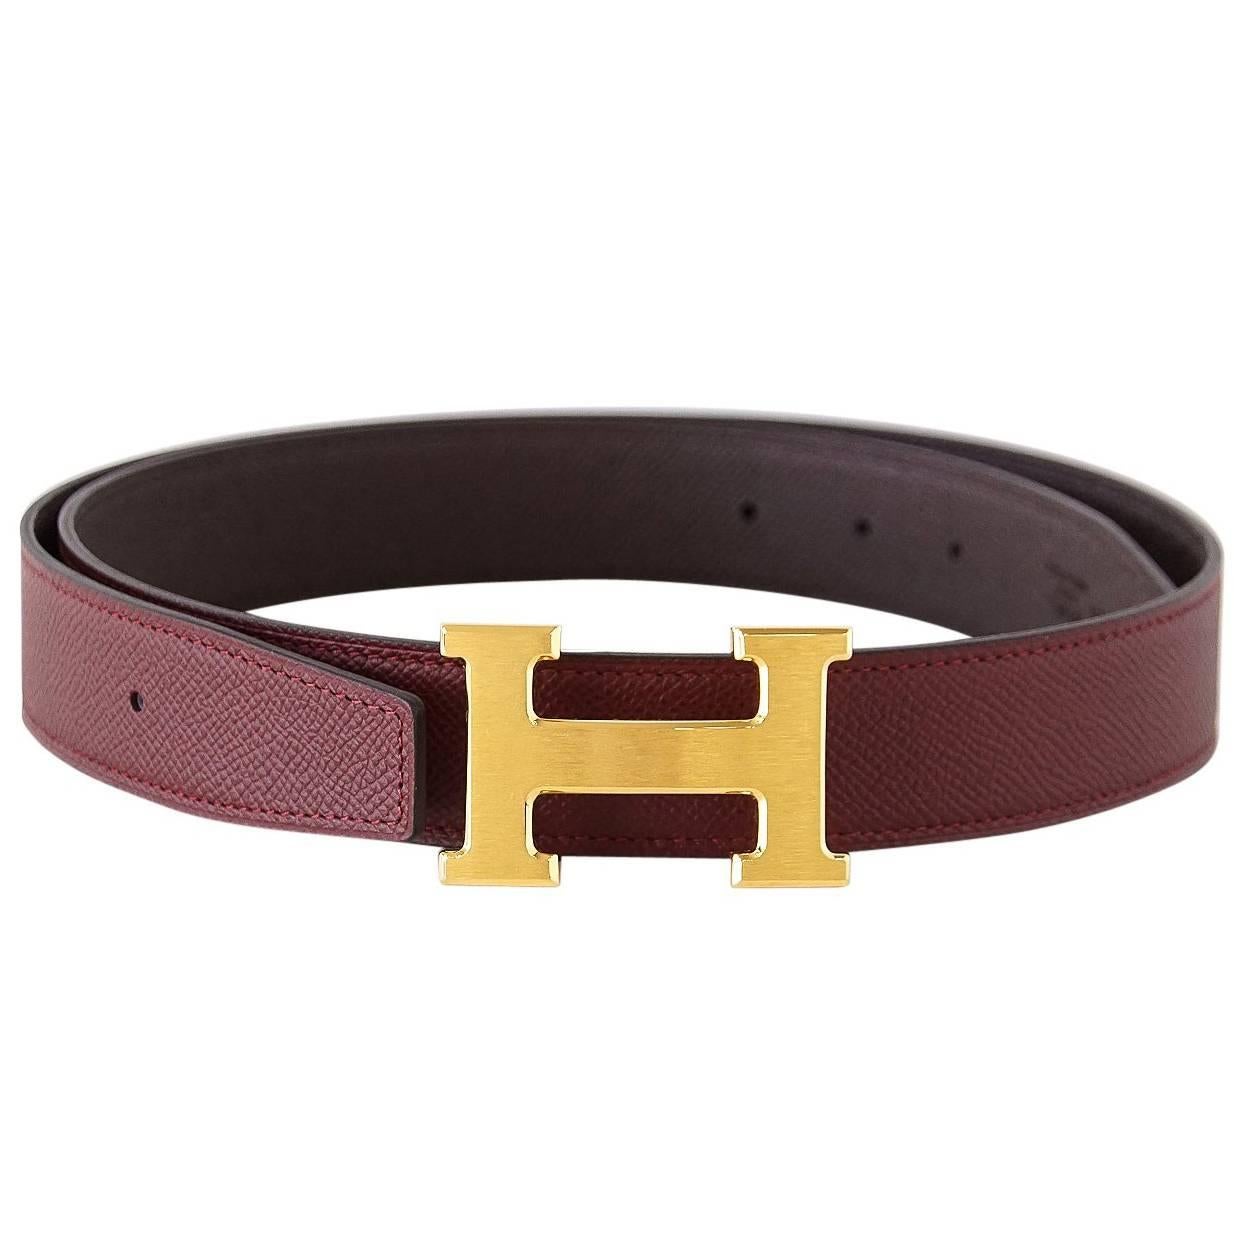 Hermes Belt H Constance 32 Rouge H / Chocolate Reversible Brushed Gold Buckle 85